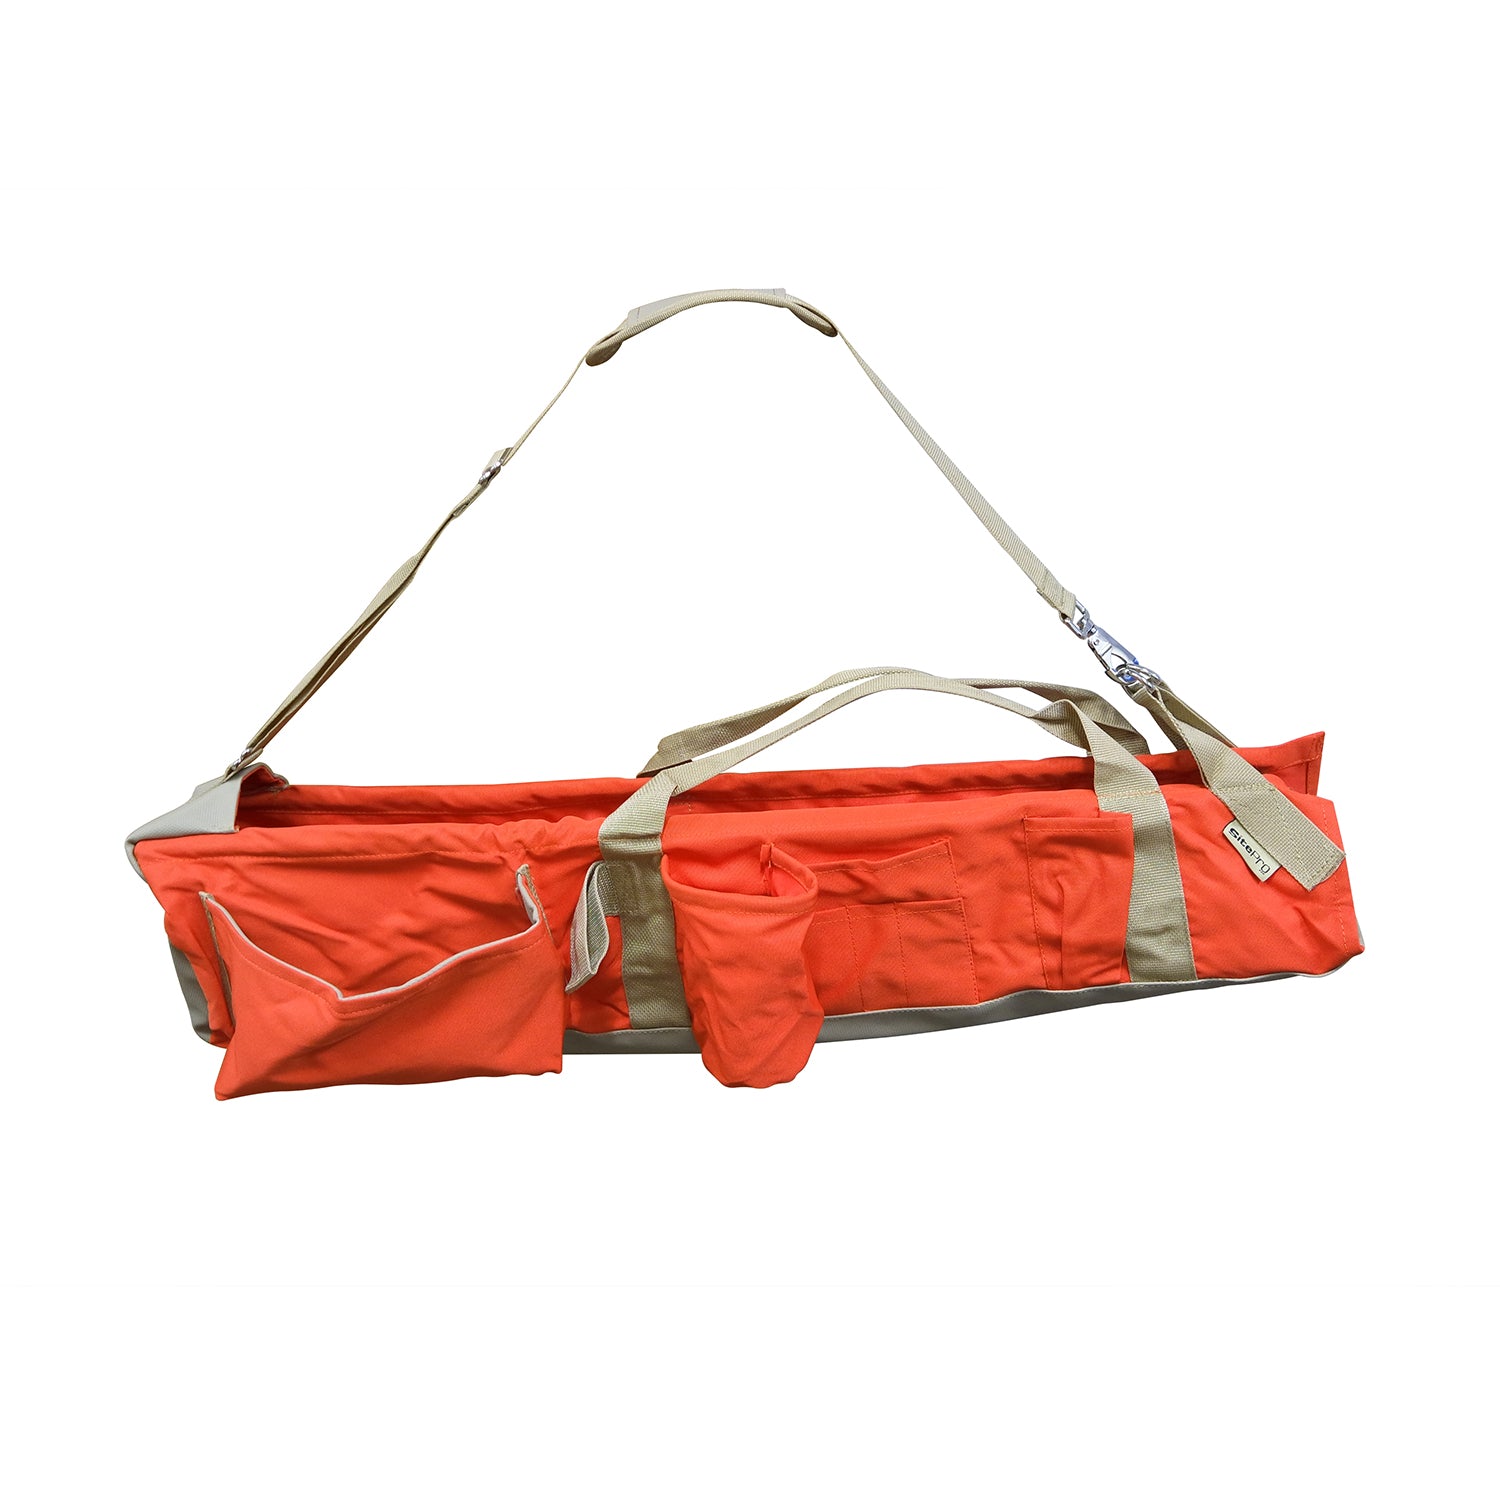 SitePro 38 Inch Heavy Duty Lath Bag with Handles -Surveying Bags- eGPS Solutions Inc.